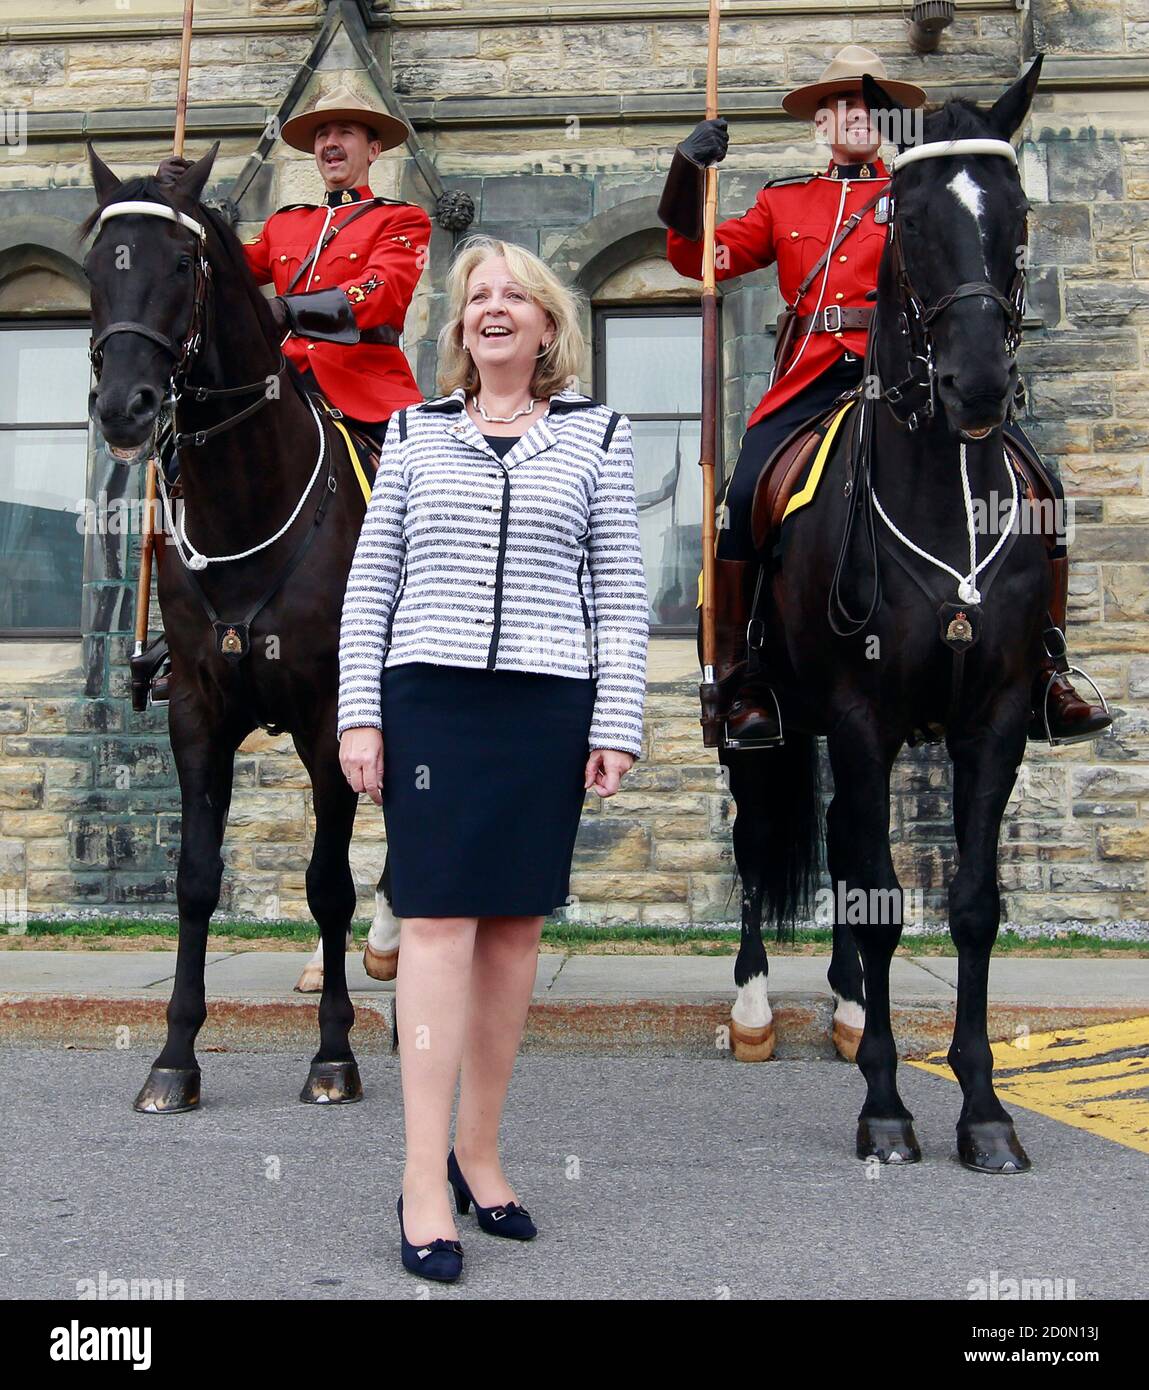 Hannelore Kraft, President of the Federal Council of Germany and North Rhine-Westphalia's state premier, reacts while posing with Royal Canadian Mounted Police officers on horseback during a visit on Parliament Hill in Ottawa September 8, 2011.       REUTERS/Chris Wattie       (CANADA - Tags: POLITICS) Stock Photo